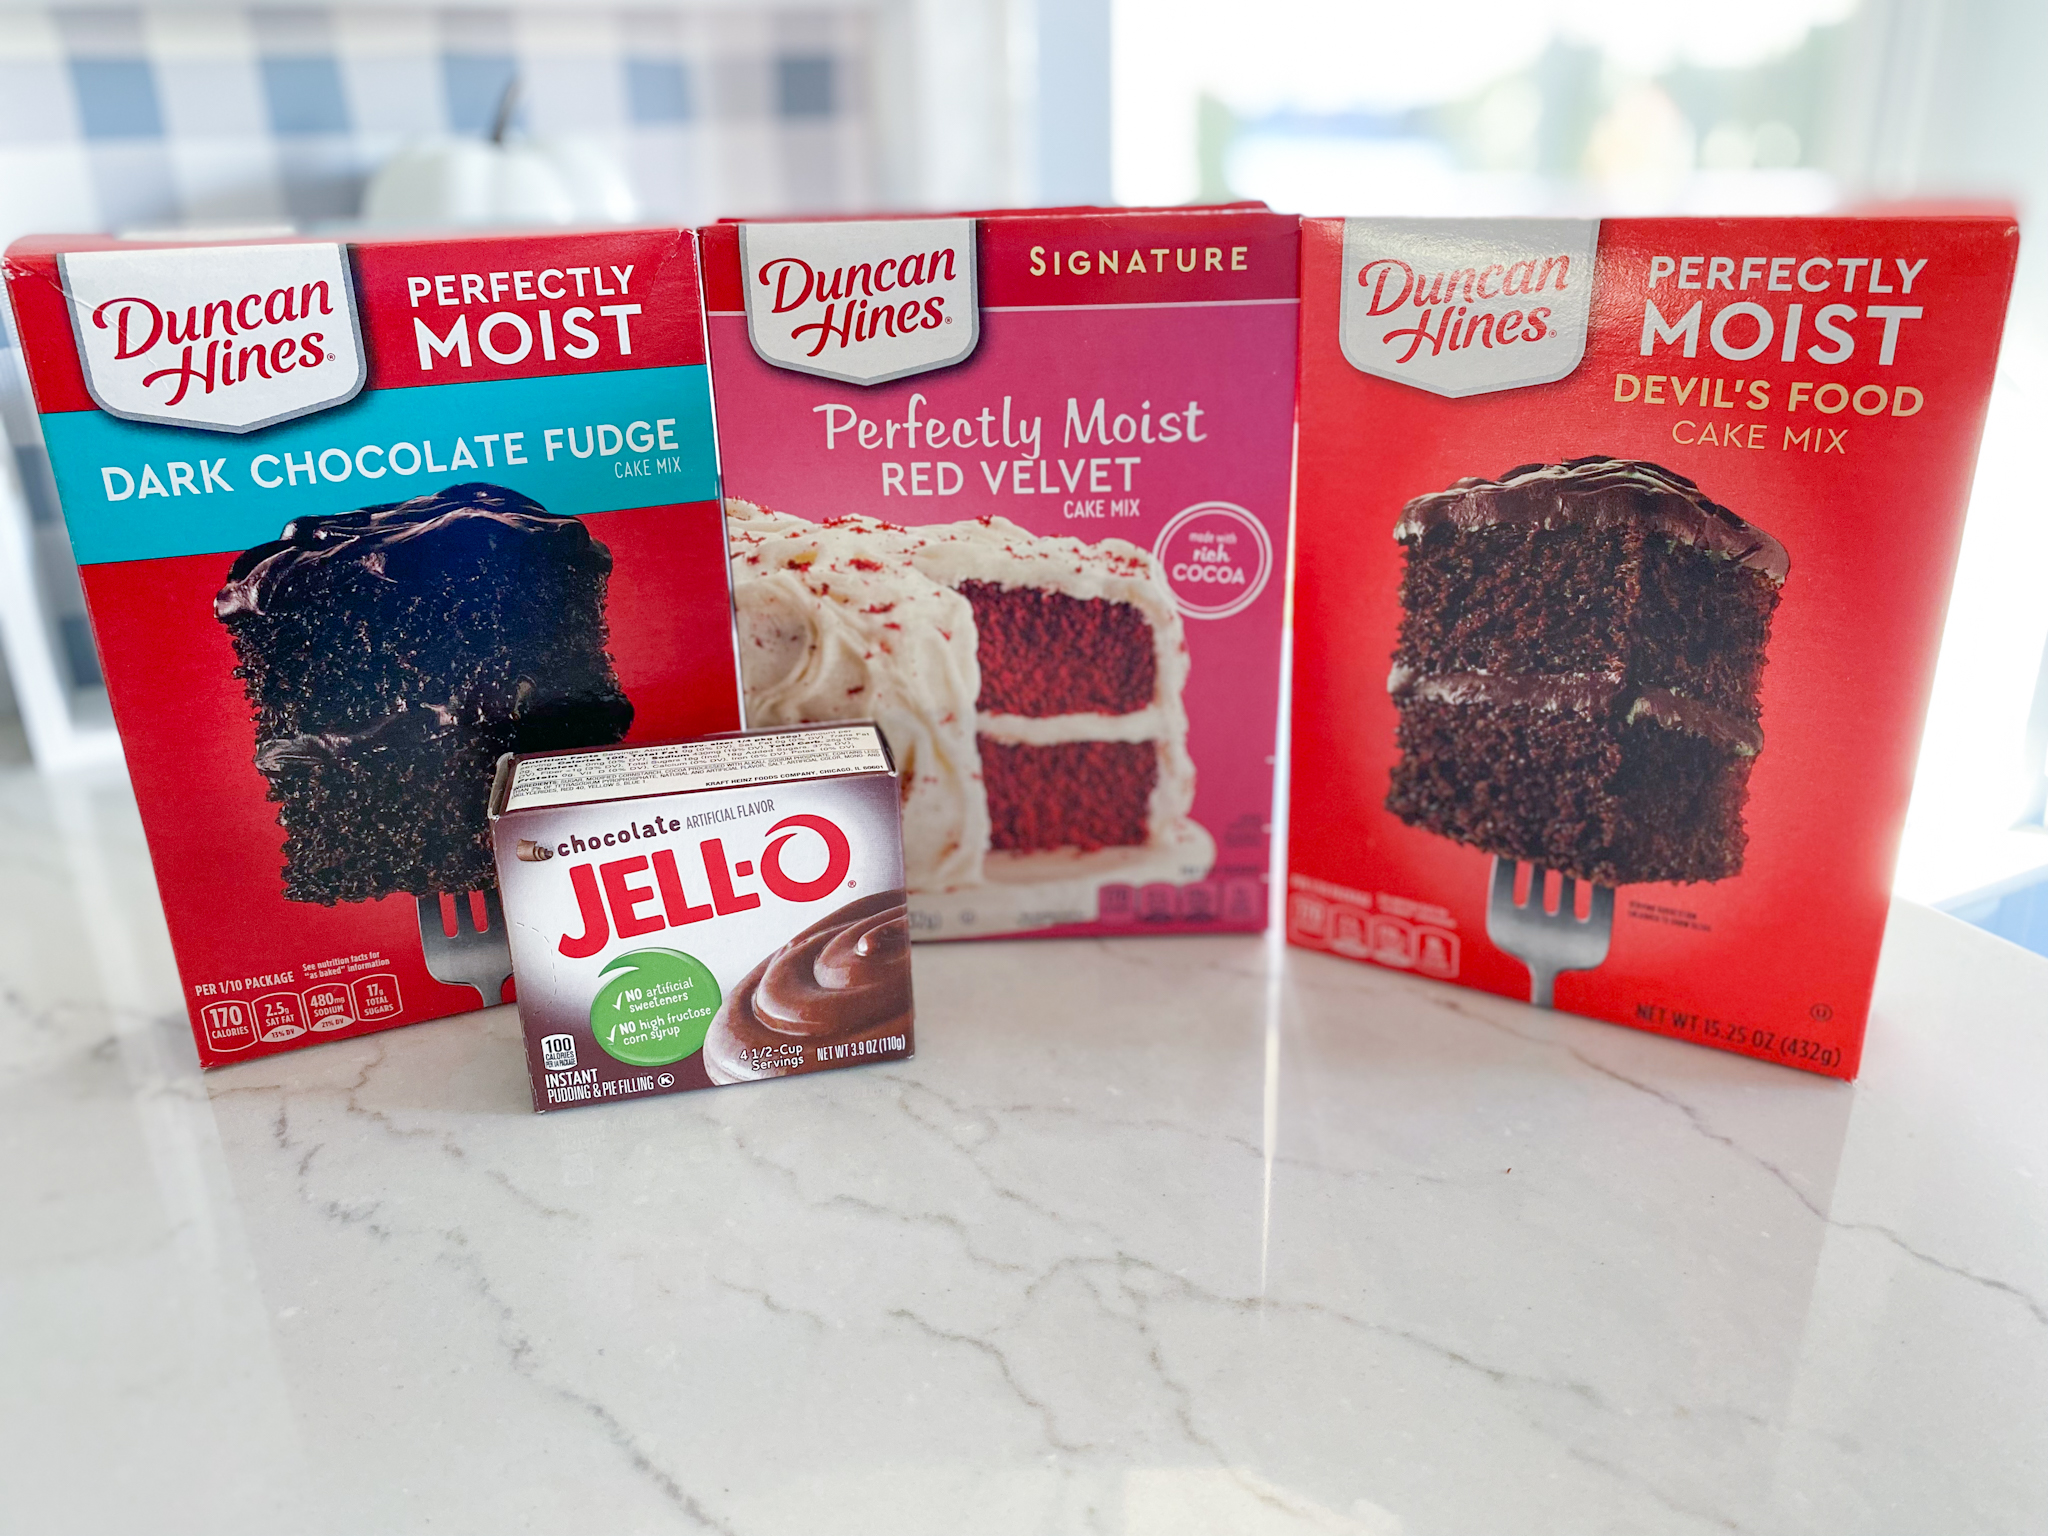 Duncan Hines dark chocolate fudge, red velvet, and devil's food cake mixes with jello instant chocolate pudding